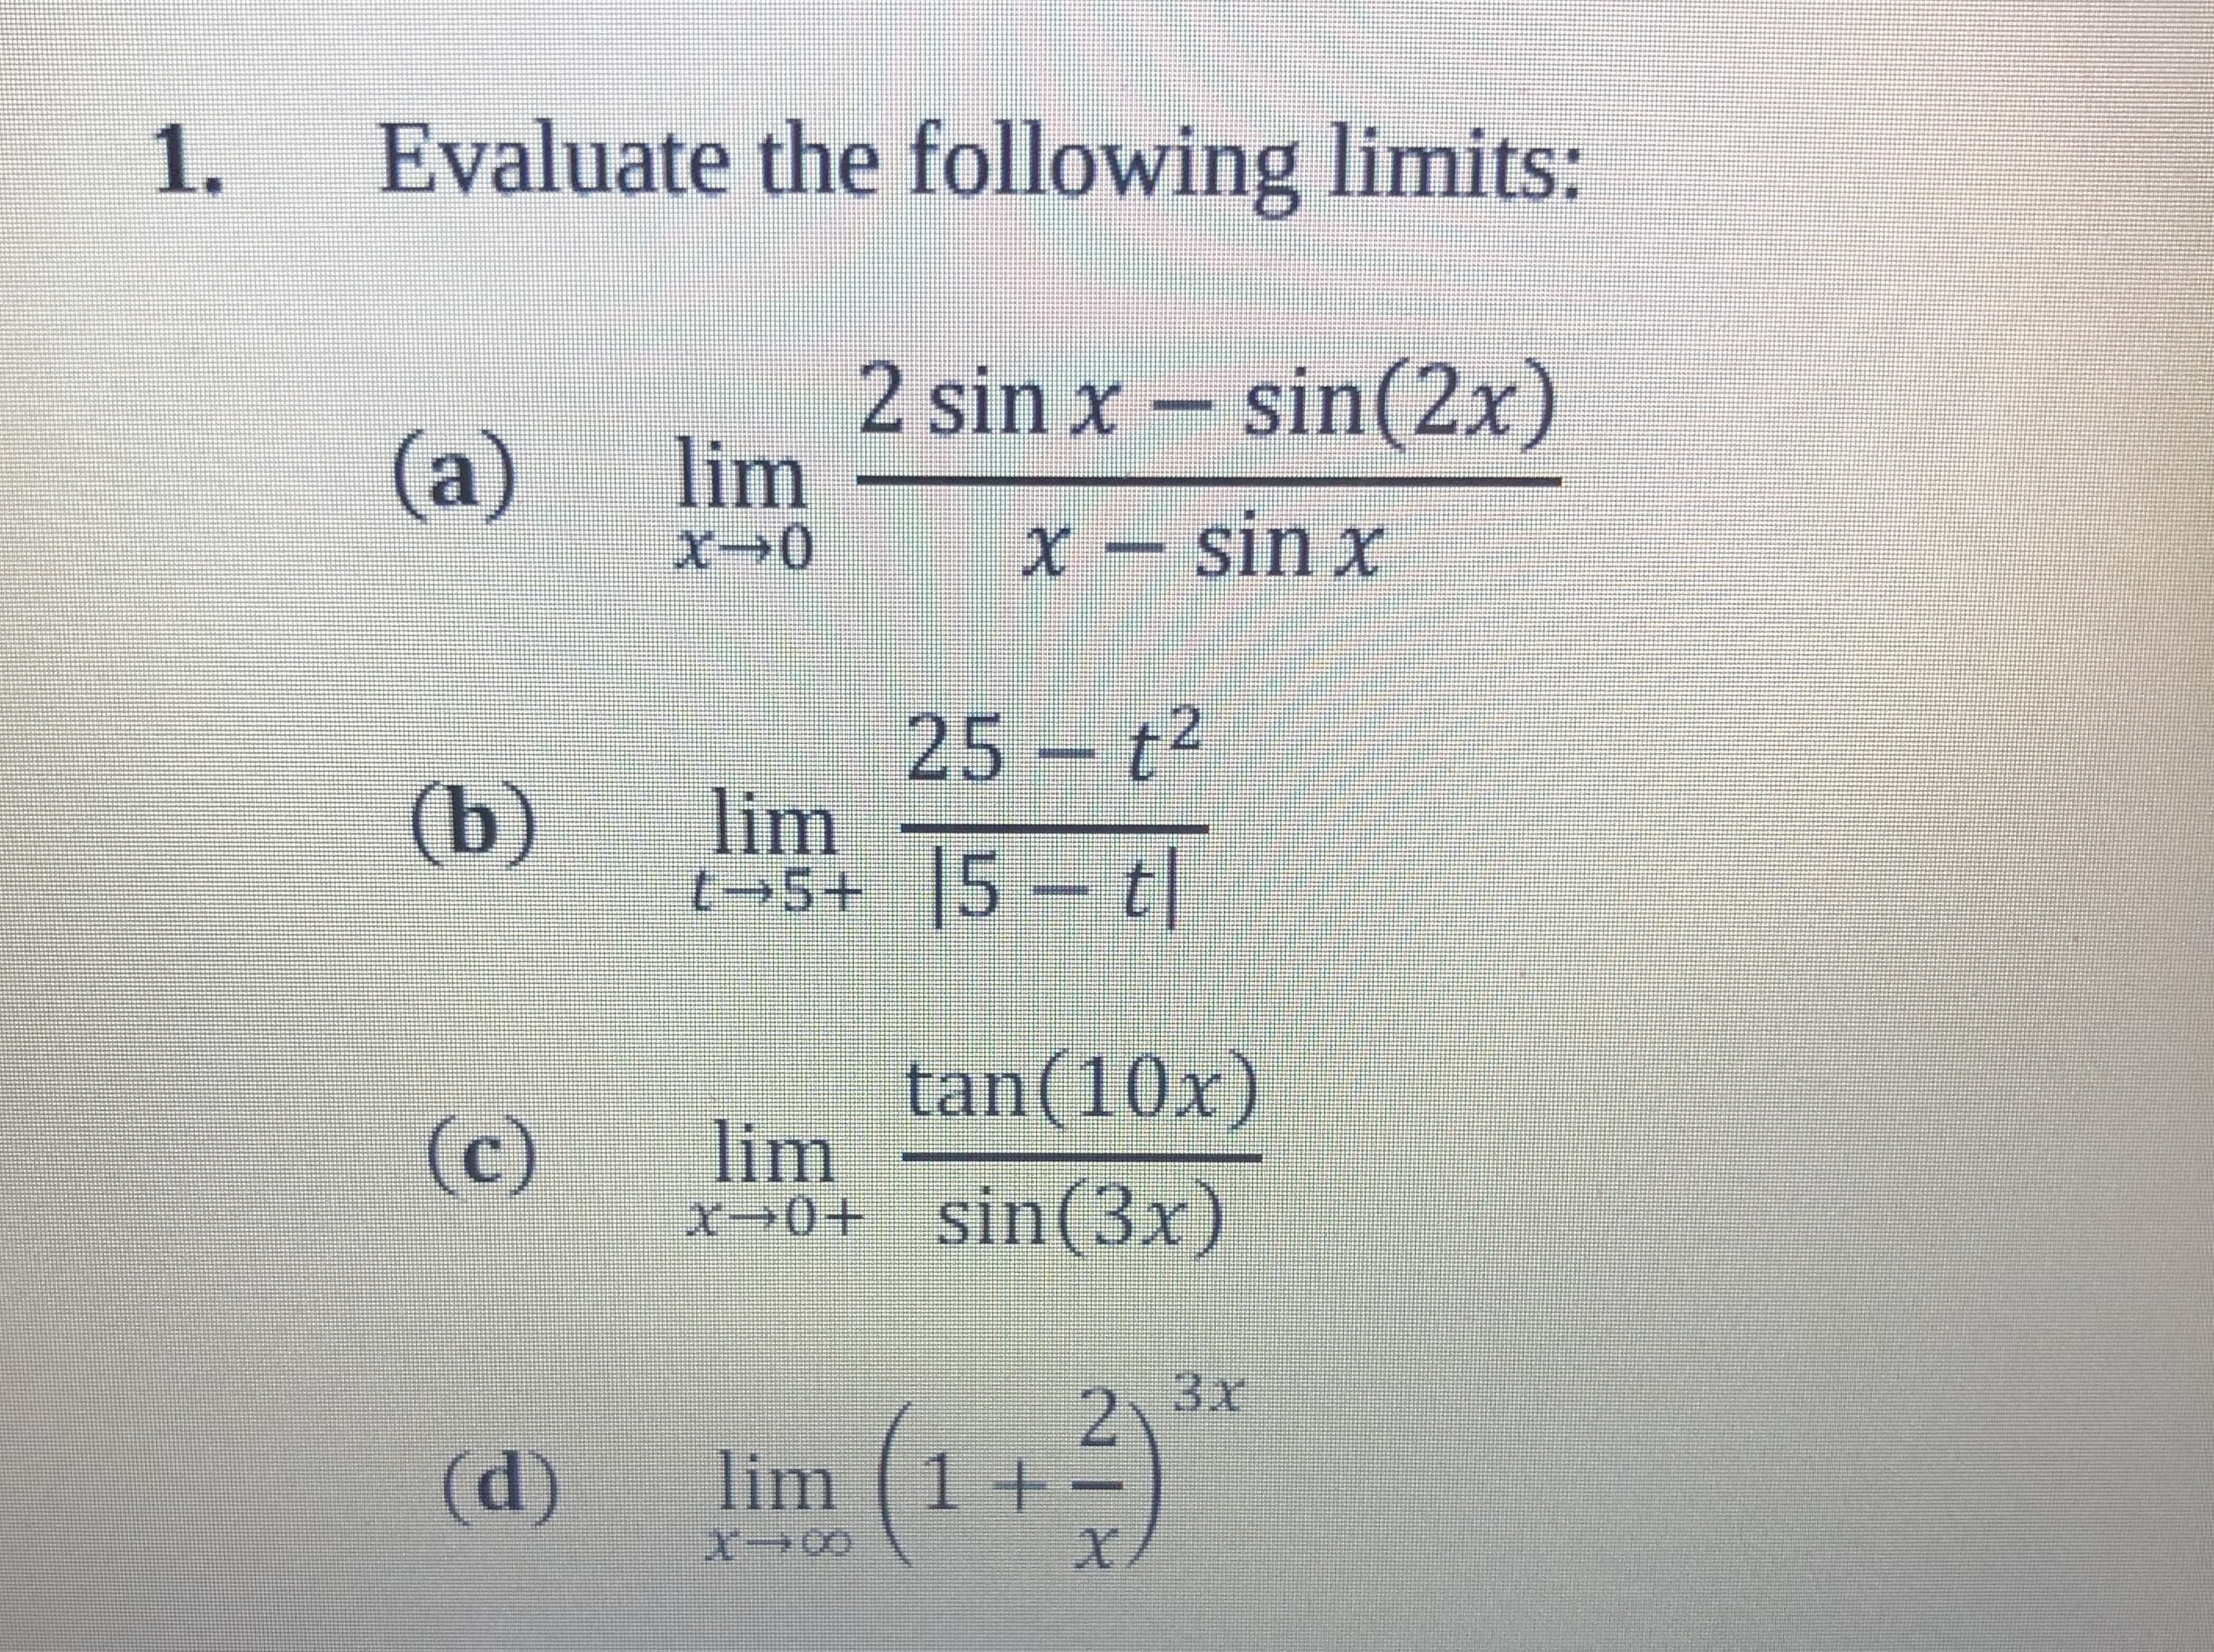 Evaluate the following limits:
1.
2 sin x - sin(2x)
-x-sin x
(a) lim
25 -t2
(b) lim 15 tl
11m,
tan(10x)
( lim sin(3x)
(c) lim
(d) lim (12
